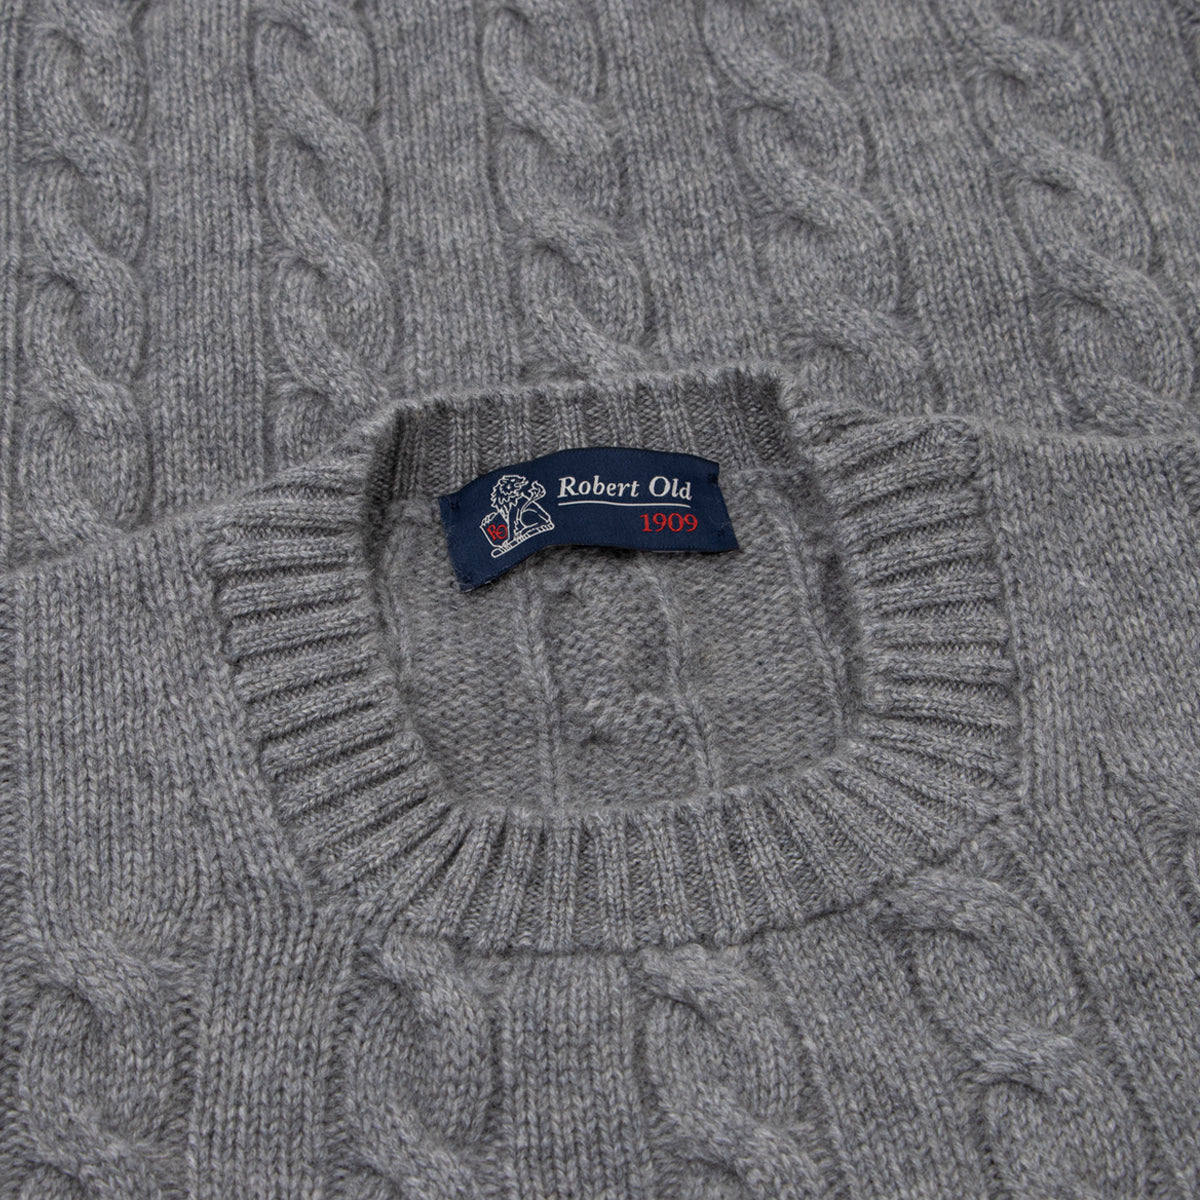 Flannel Rothesay 4ply Cable Crew Cashmere Sweater  Robert Old   